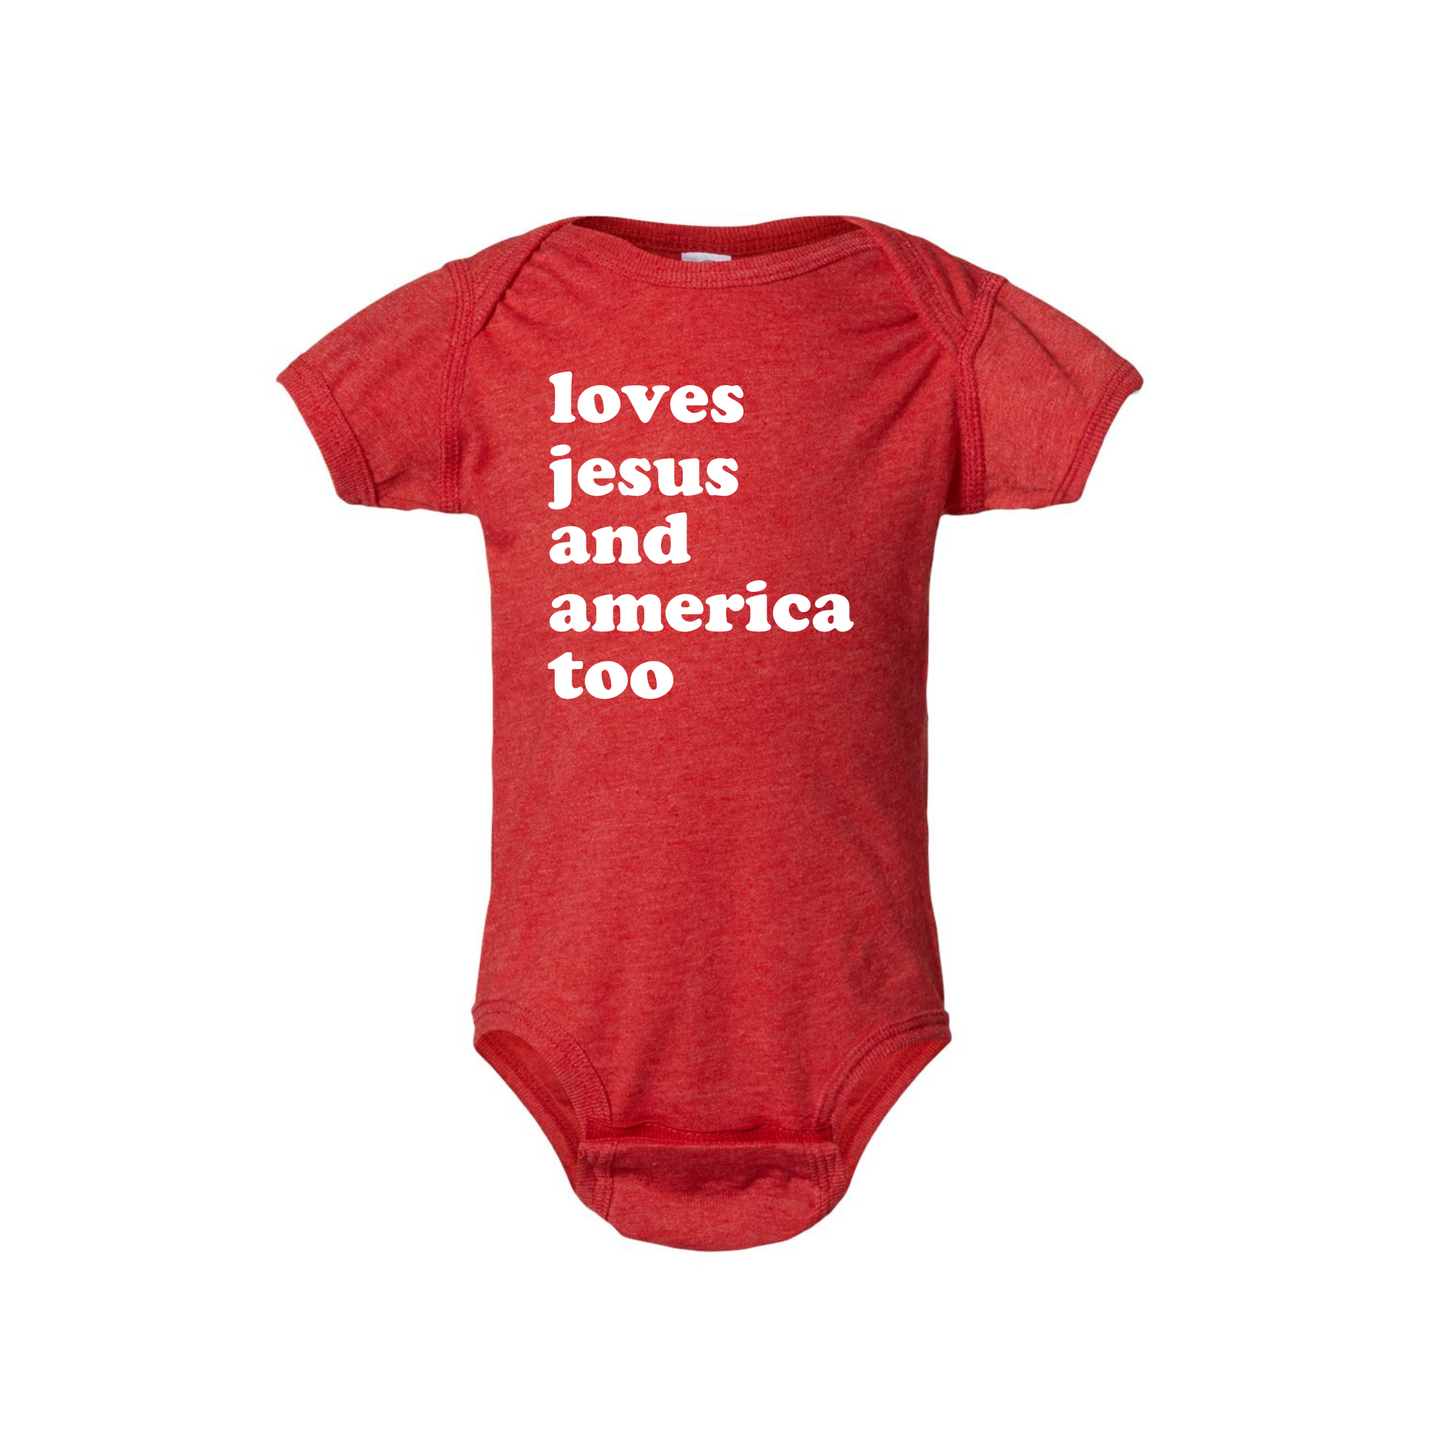 Loves Jesus and America too Body Suit